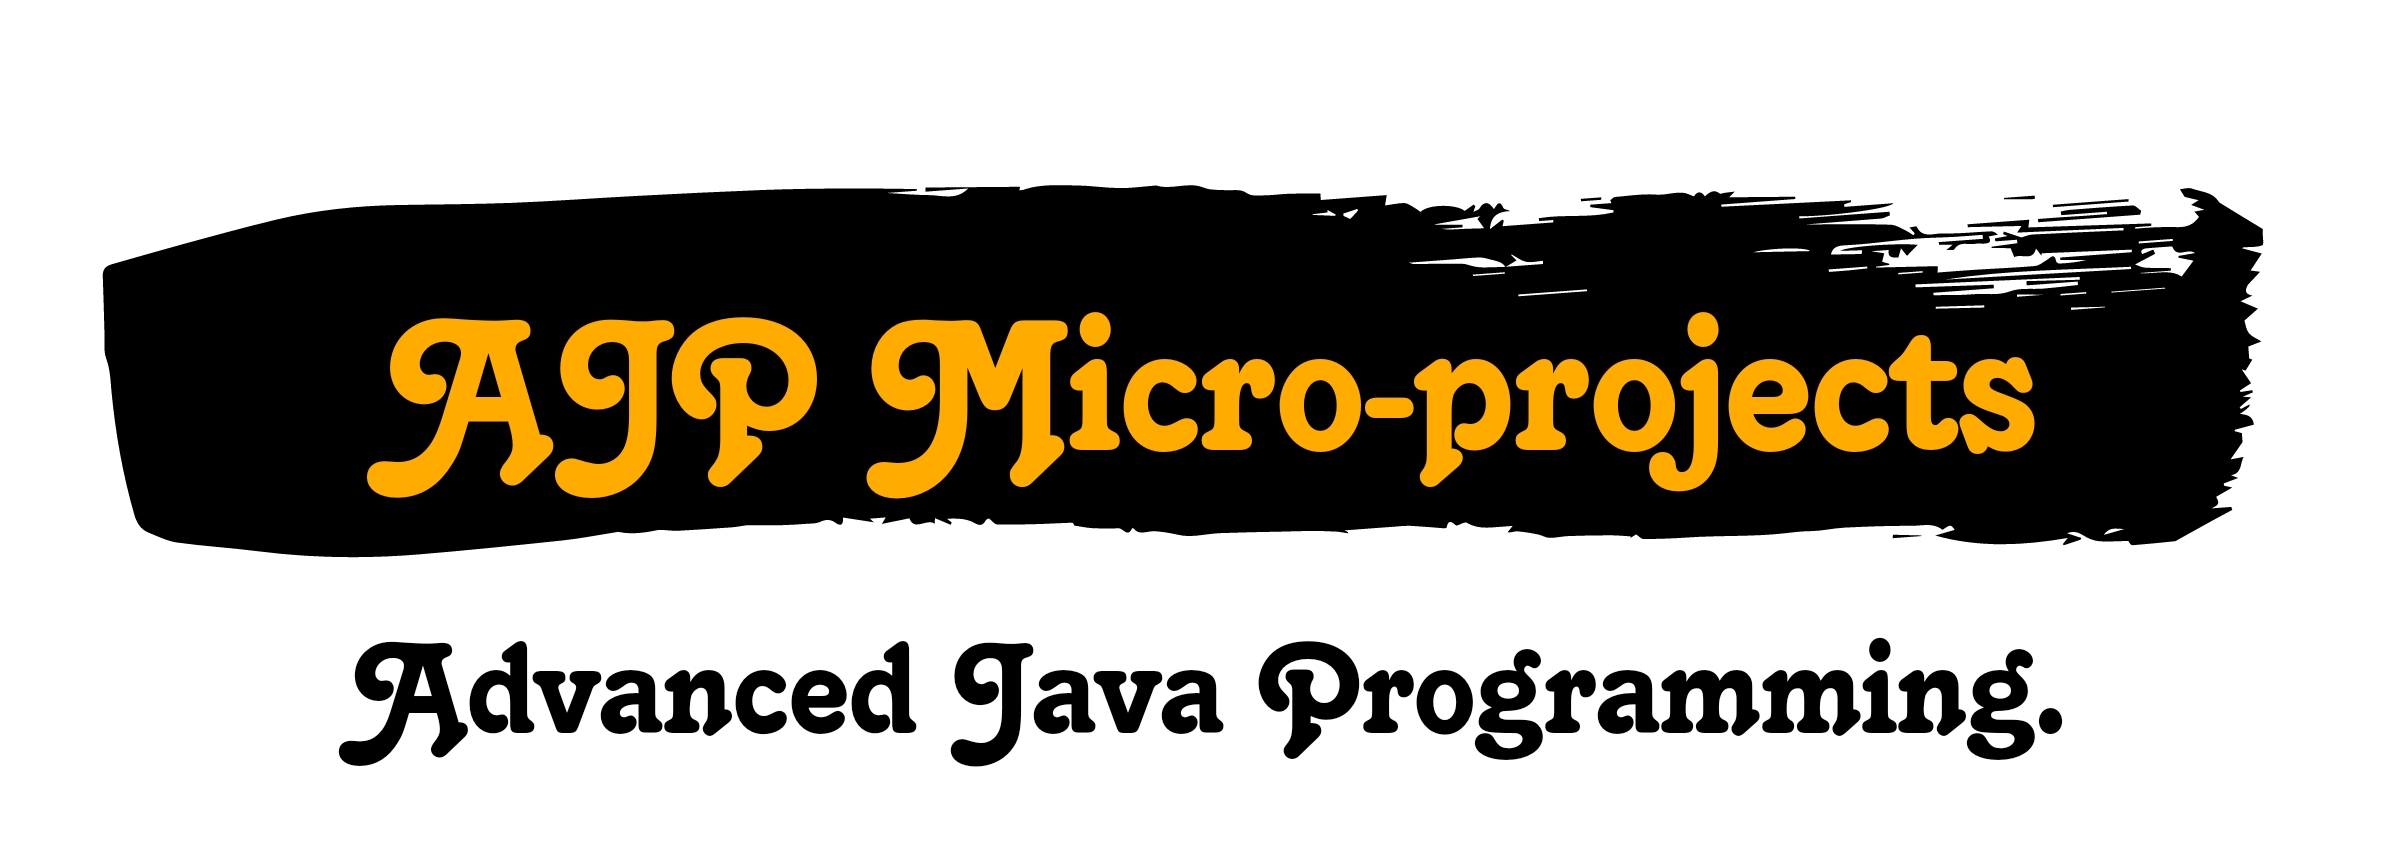 Msbte AJP Ready Micro-projects